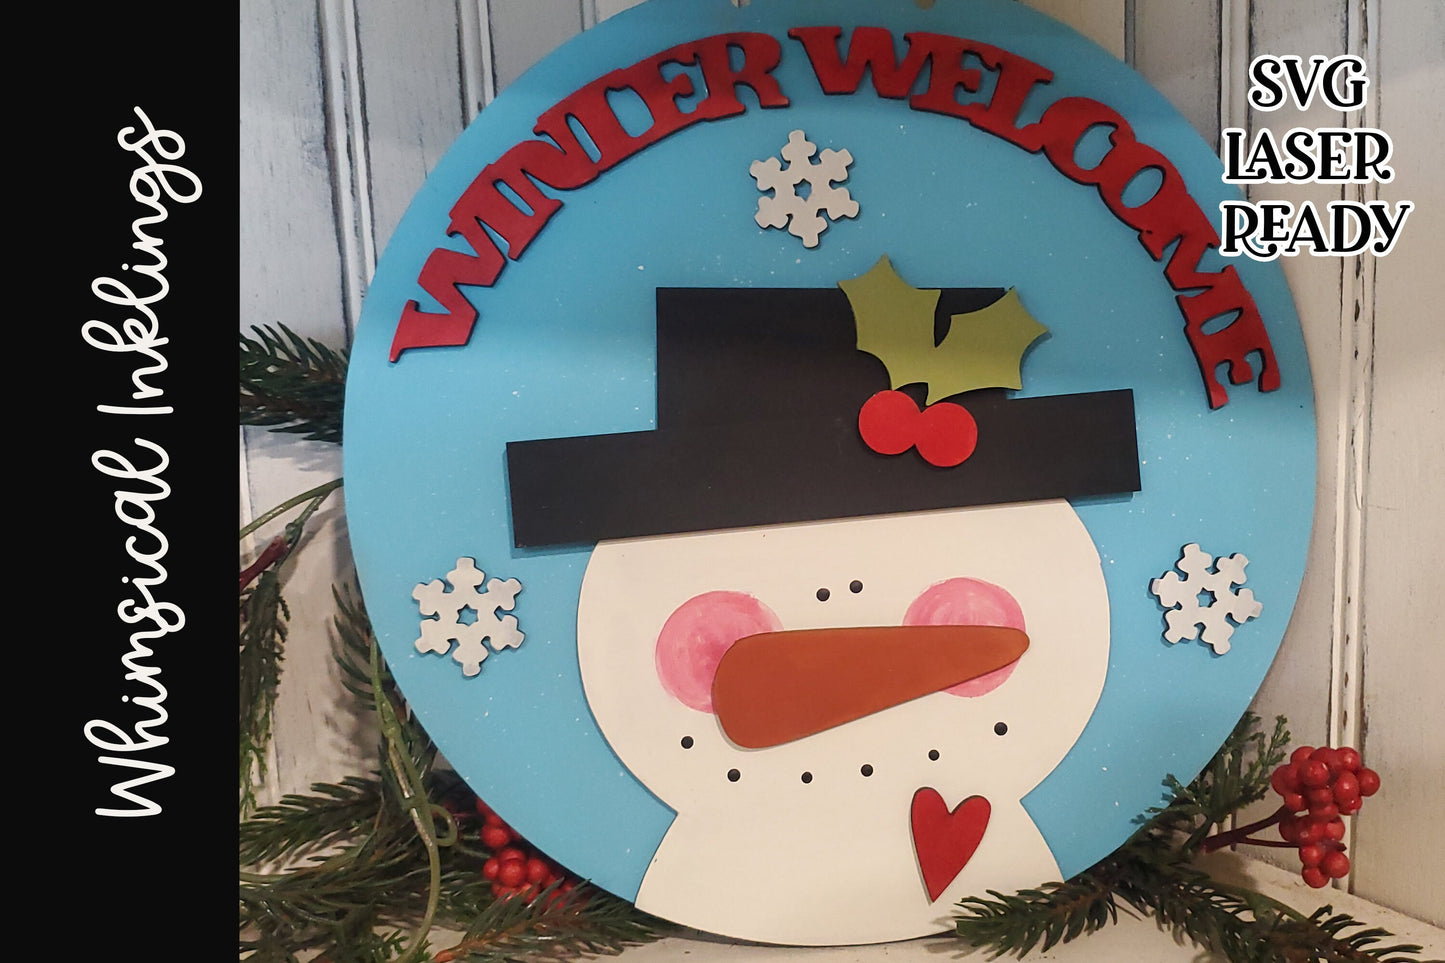 Welcome Winter Snowman Sign SVG |Laser Ready Snowman| Glow forge Snowman Sign| Snowman SVG